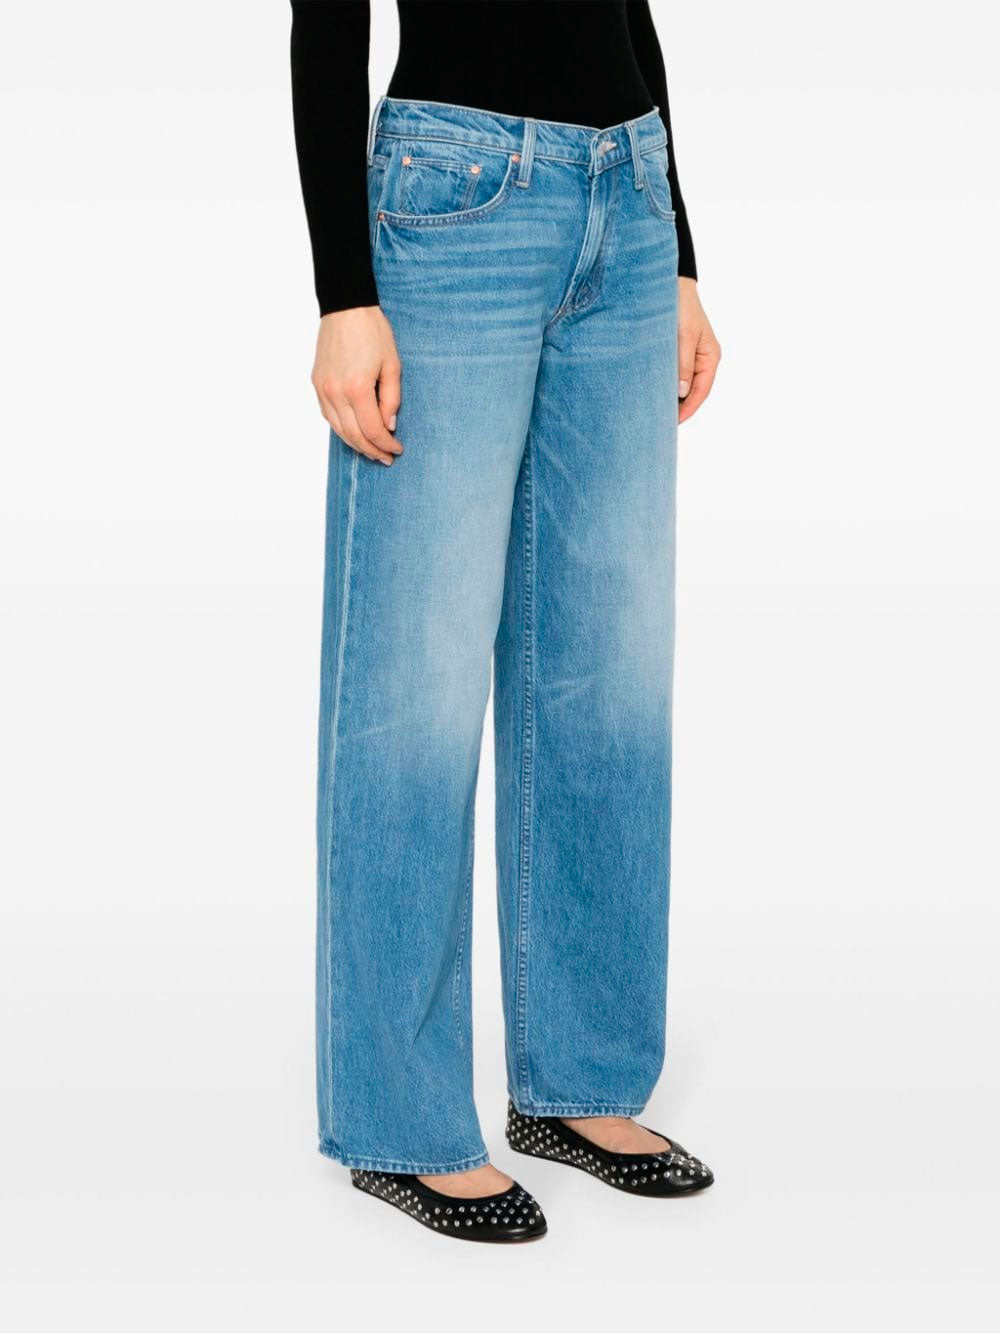 The Down Low Spinner Sneak jeans